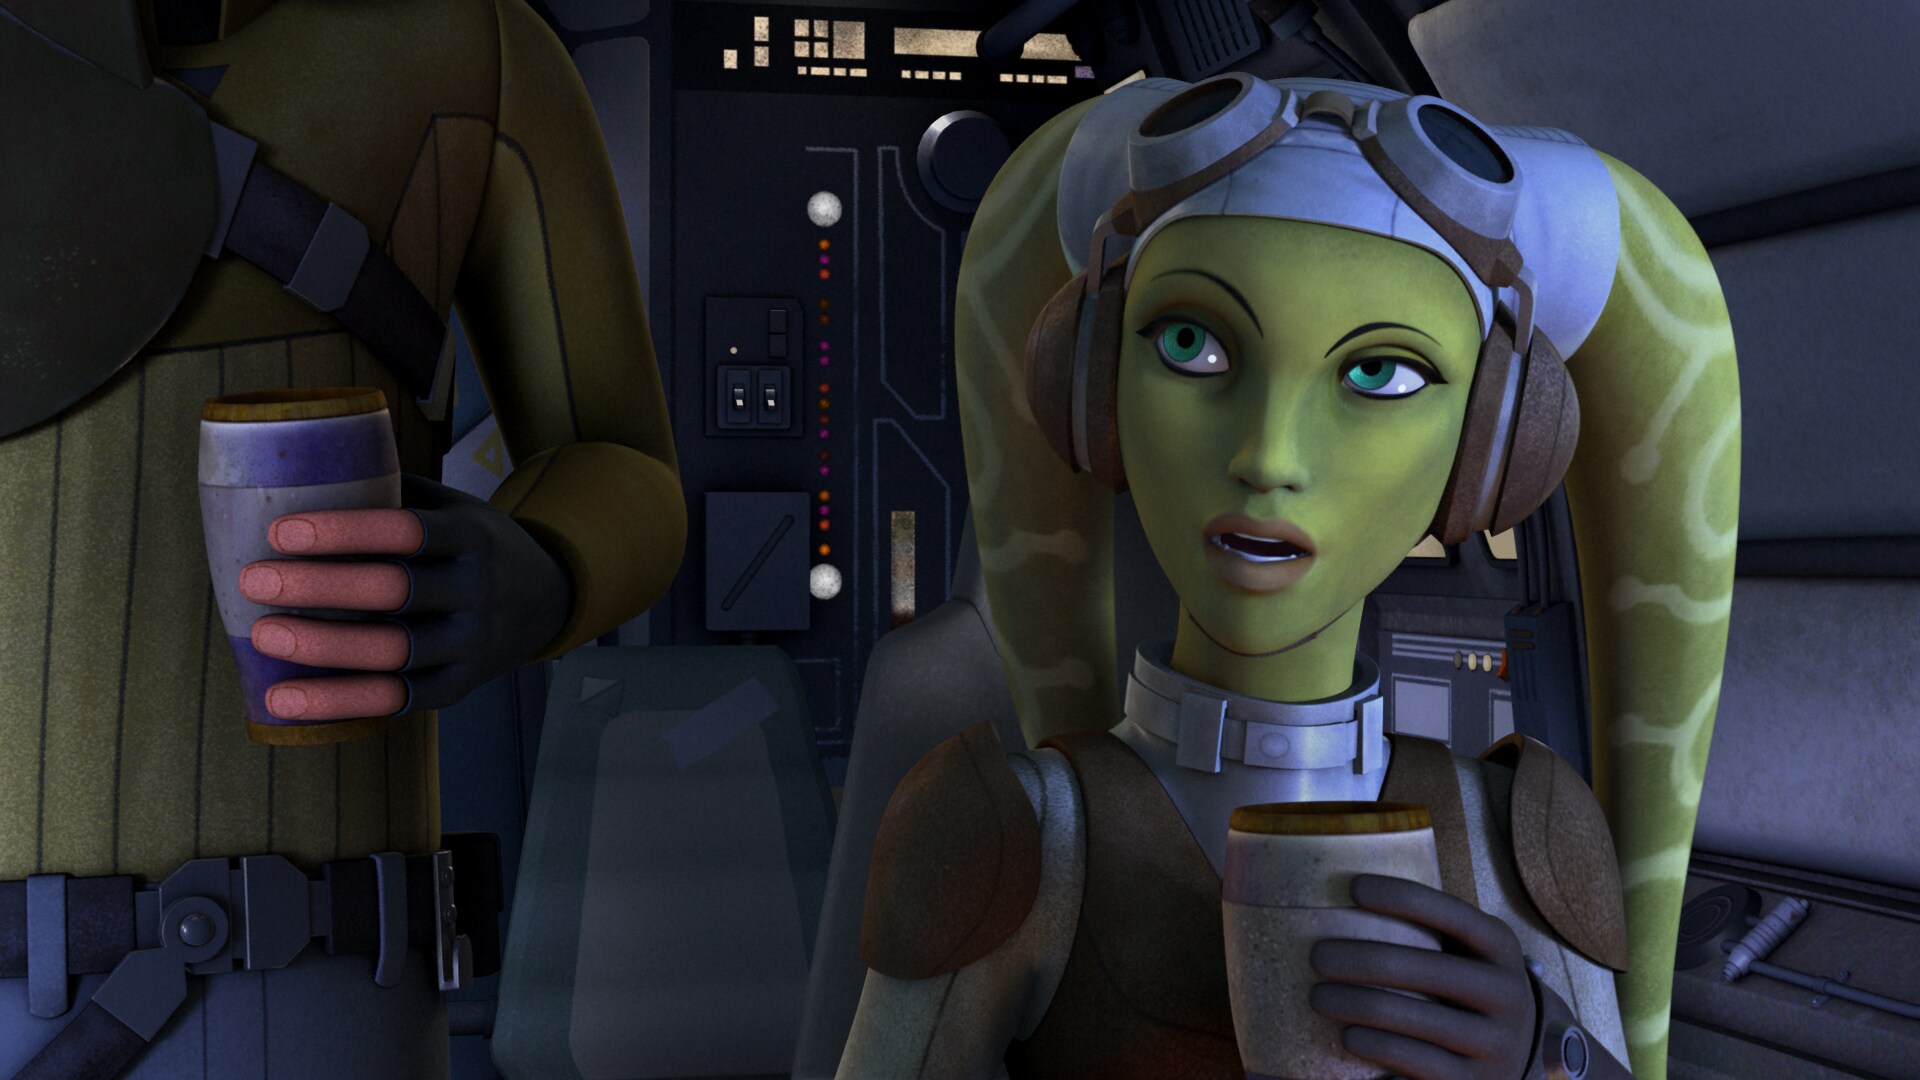 In the script, the beverages that Kanan and Hera are enjoying during some downtime are cups of Sp...